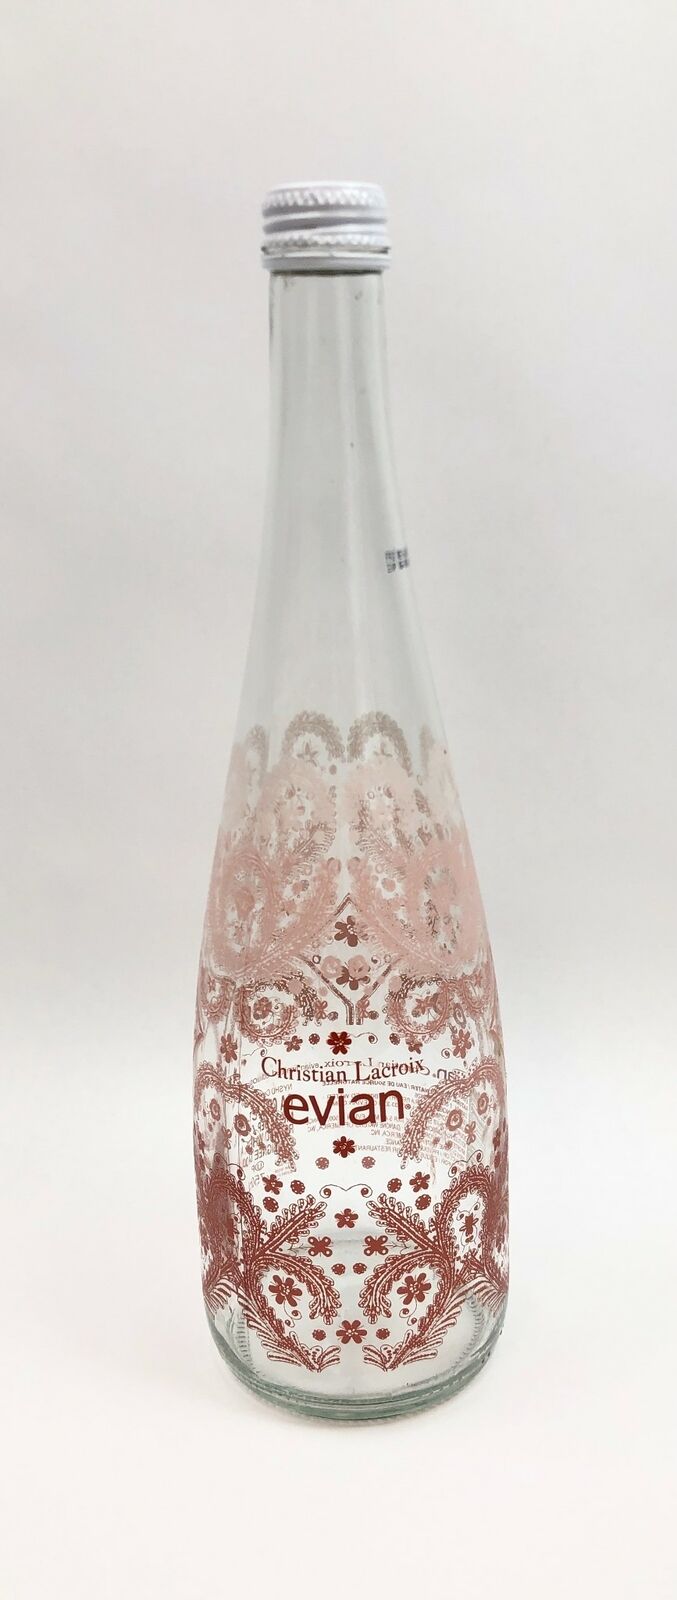 Evian Christian Lacroix Glass Watter Bottle Opened Collectible Limited Edition